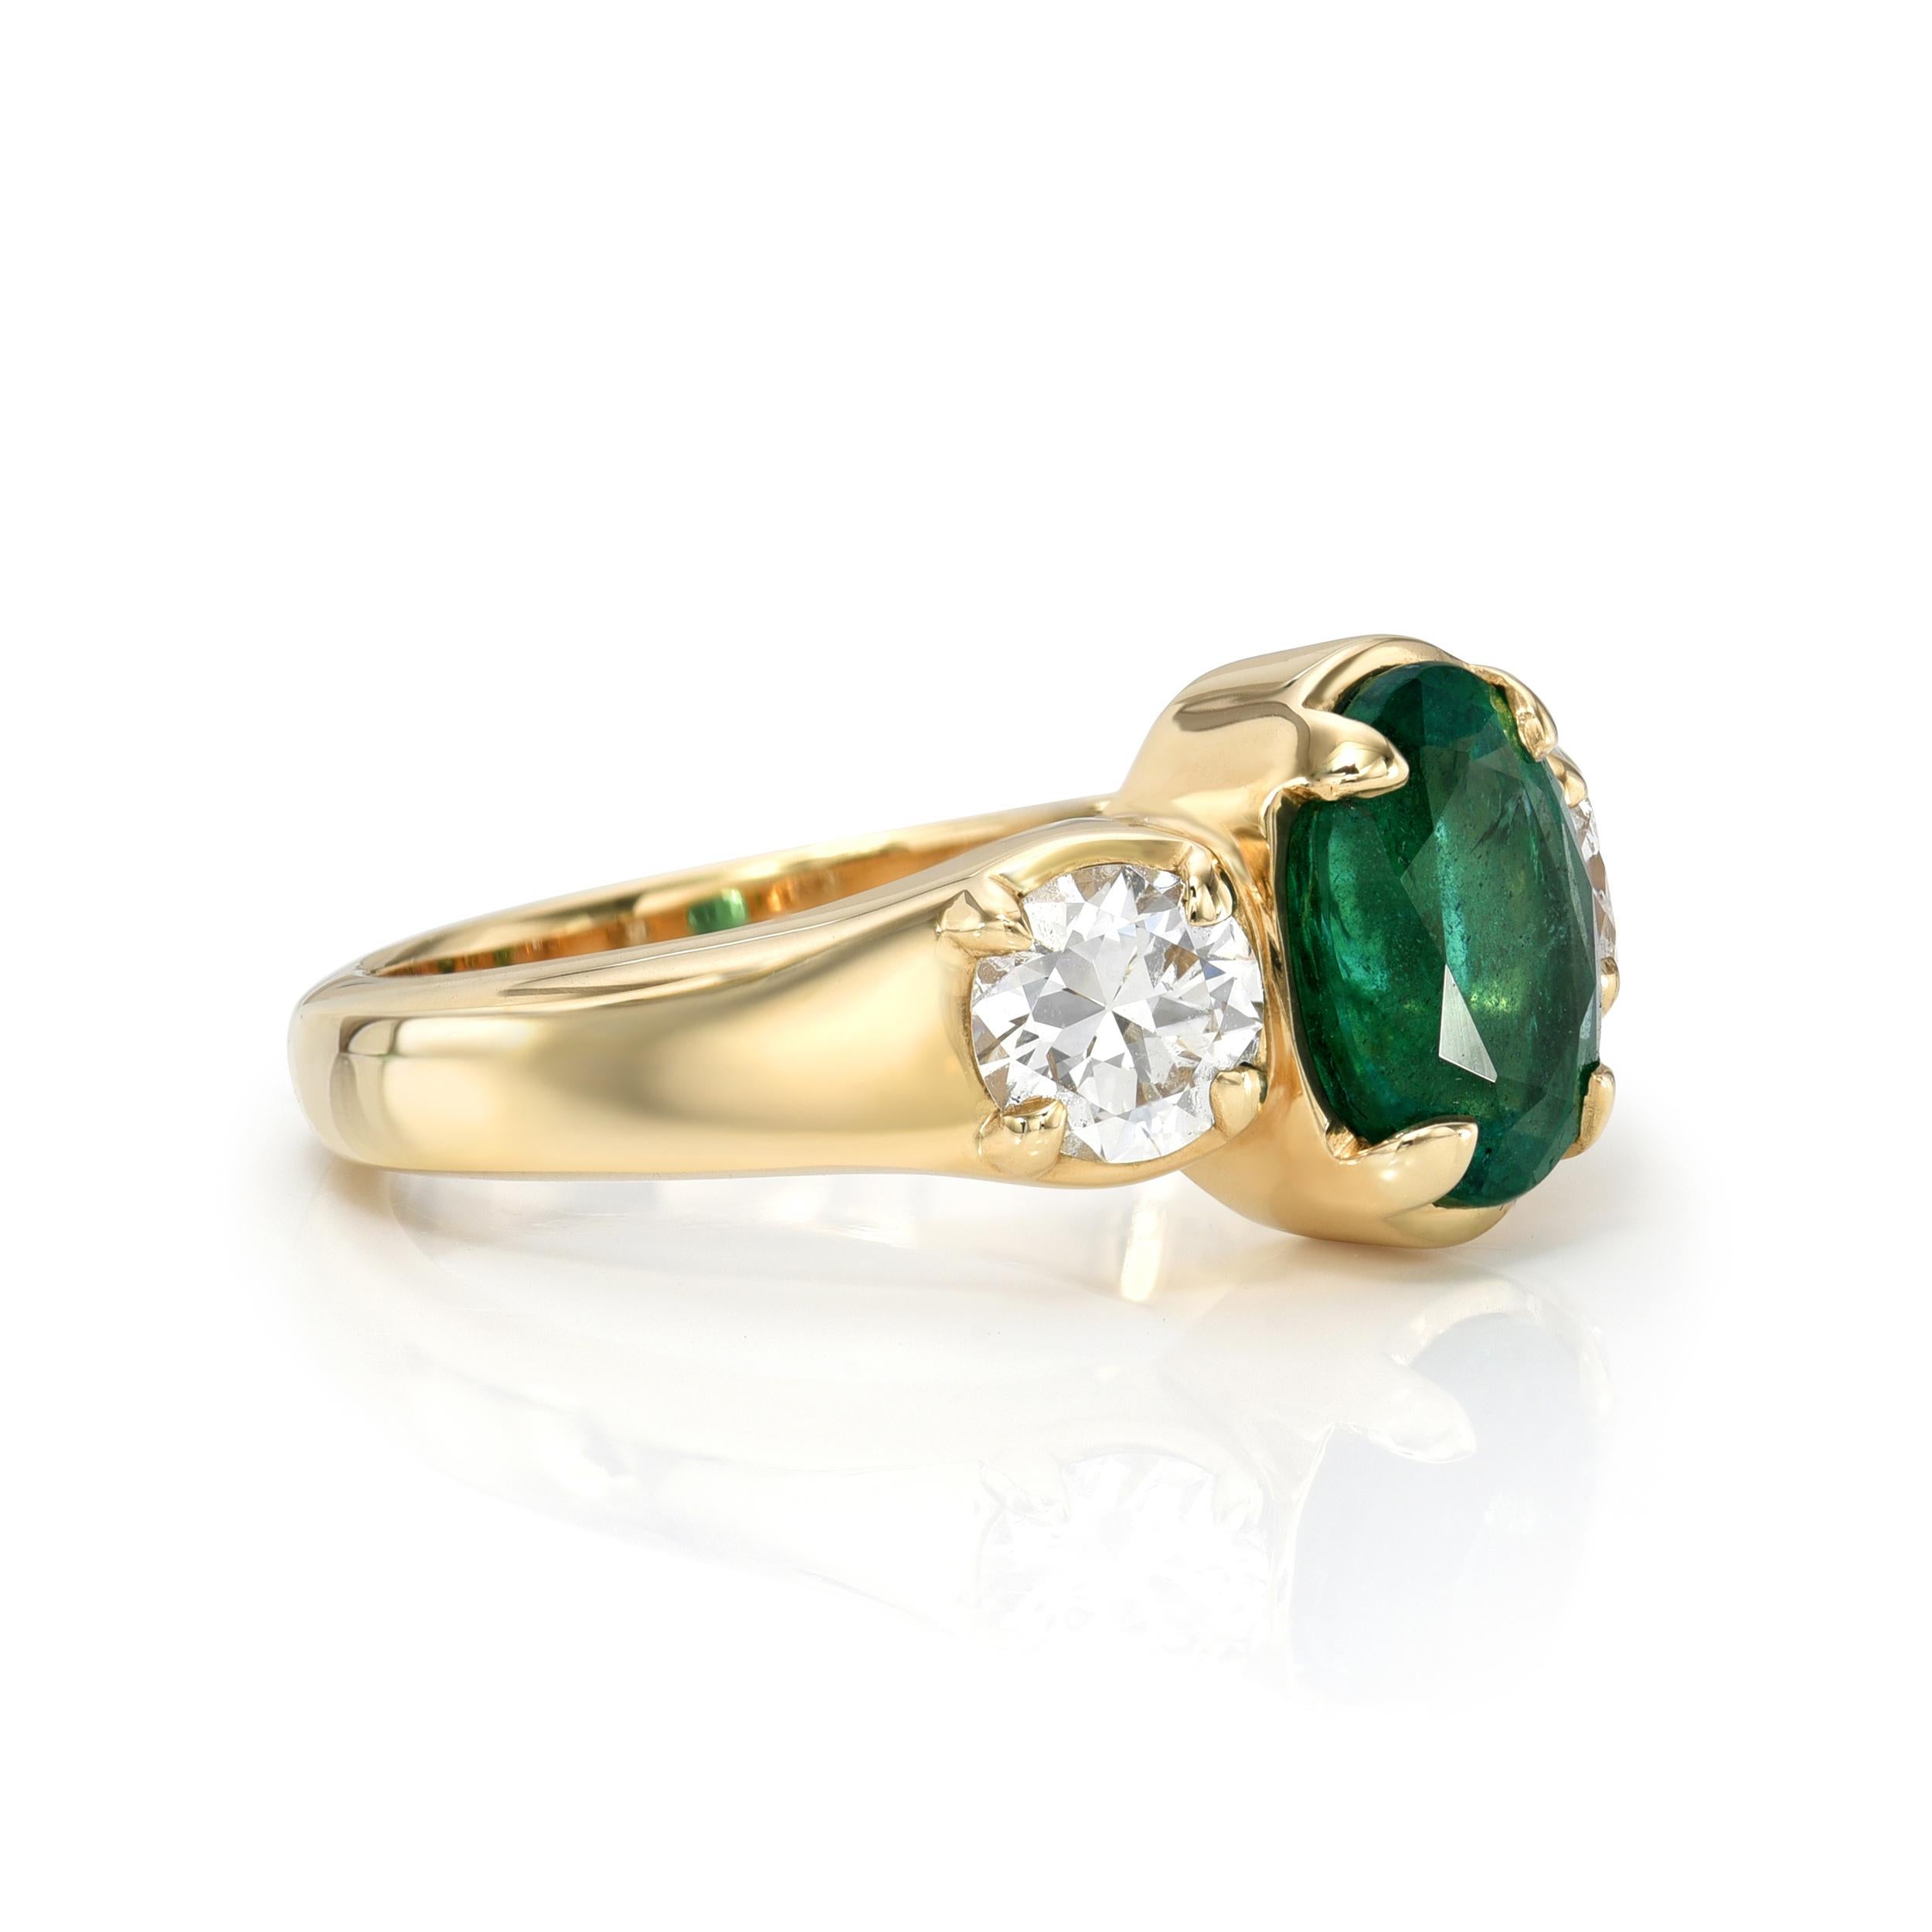 2.05ct GIA certified Zambian cushion cut green emerald with 0.94ctw I-K/SI1-SI2 GIA certified old European cut accent diamonds prong set in a handcrafted 18K yellow gold mounting.